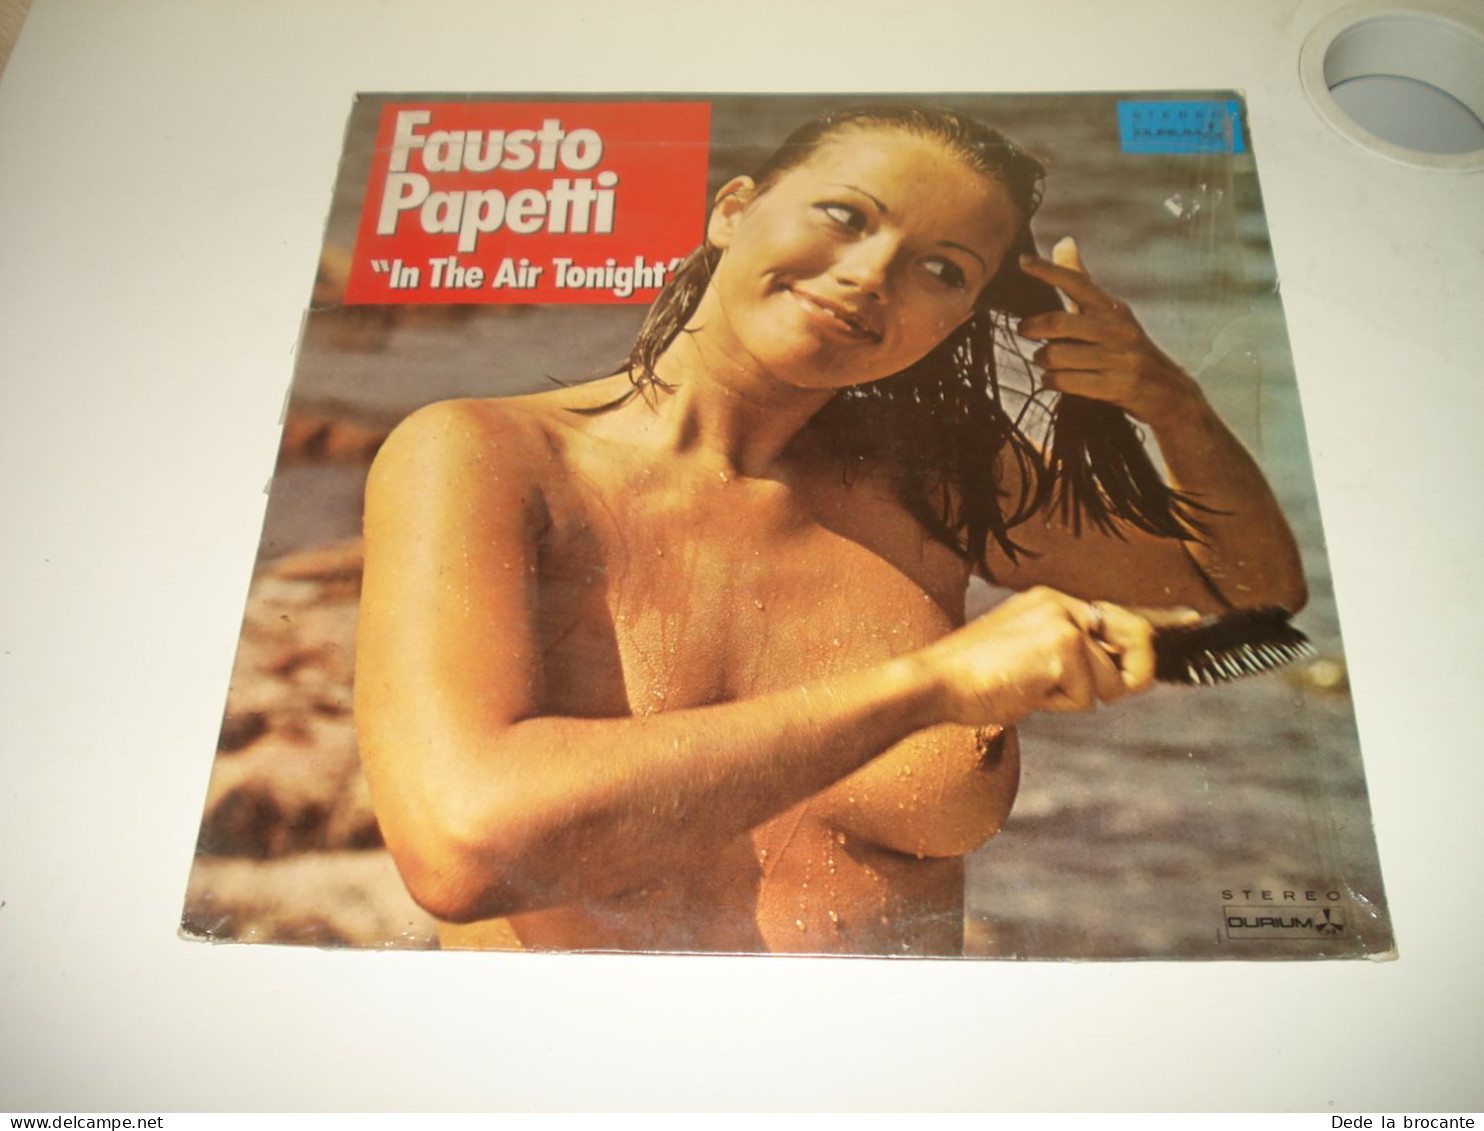 B14 / Fausto Papetti – In The Air Tonight - LP -  A 120 DU 77425 - Fr 1982 NM/NM - Jazz